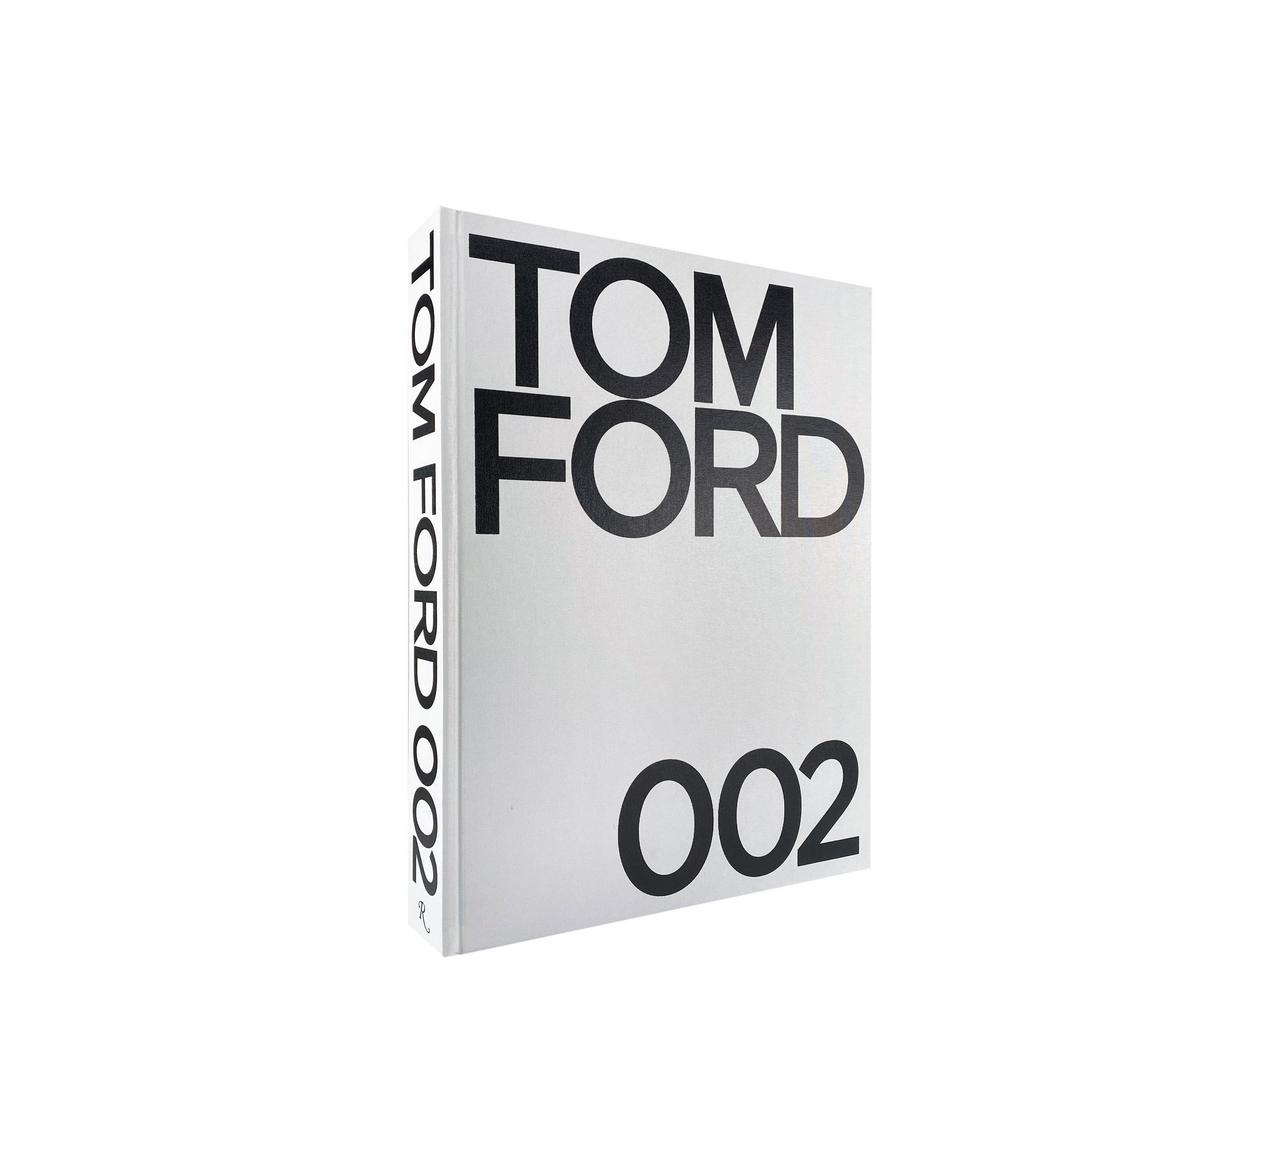 Tom Ford Book